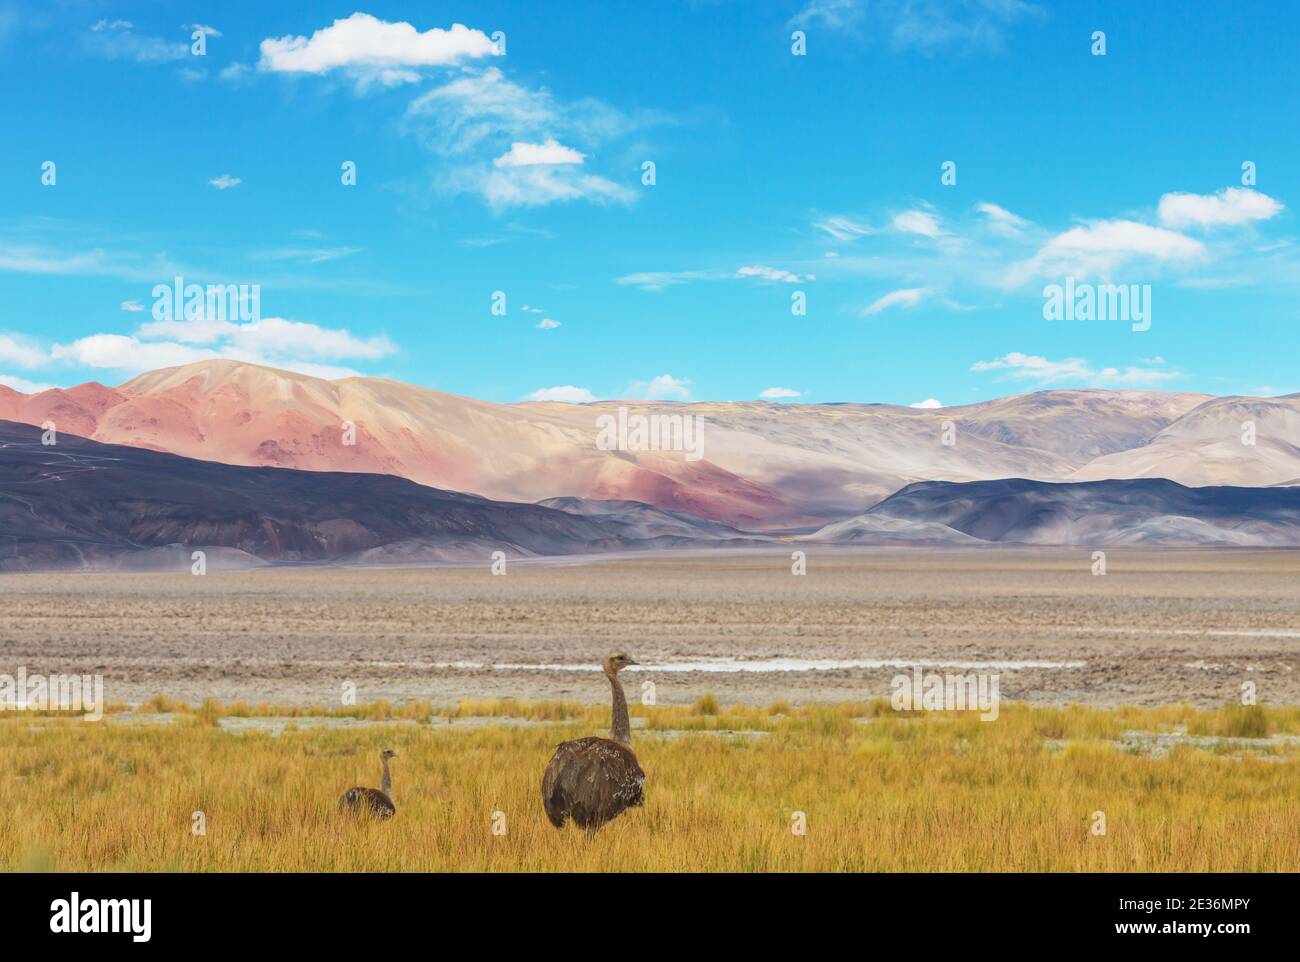 Greater rhea or nandu ostrich near Torres del Paine national park, Chile Stock Photo